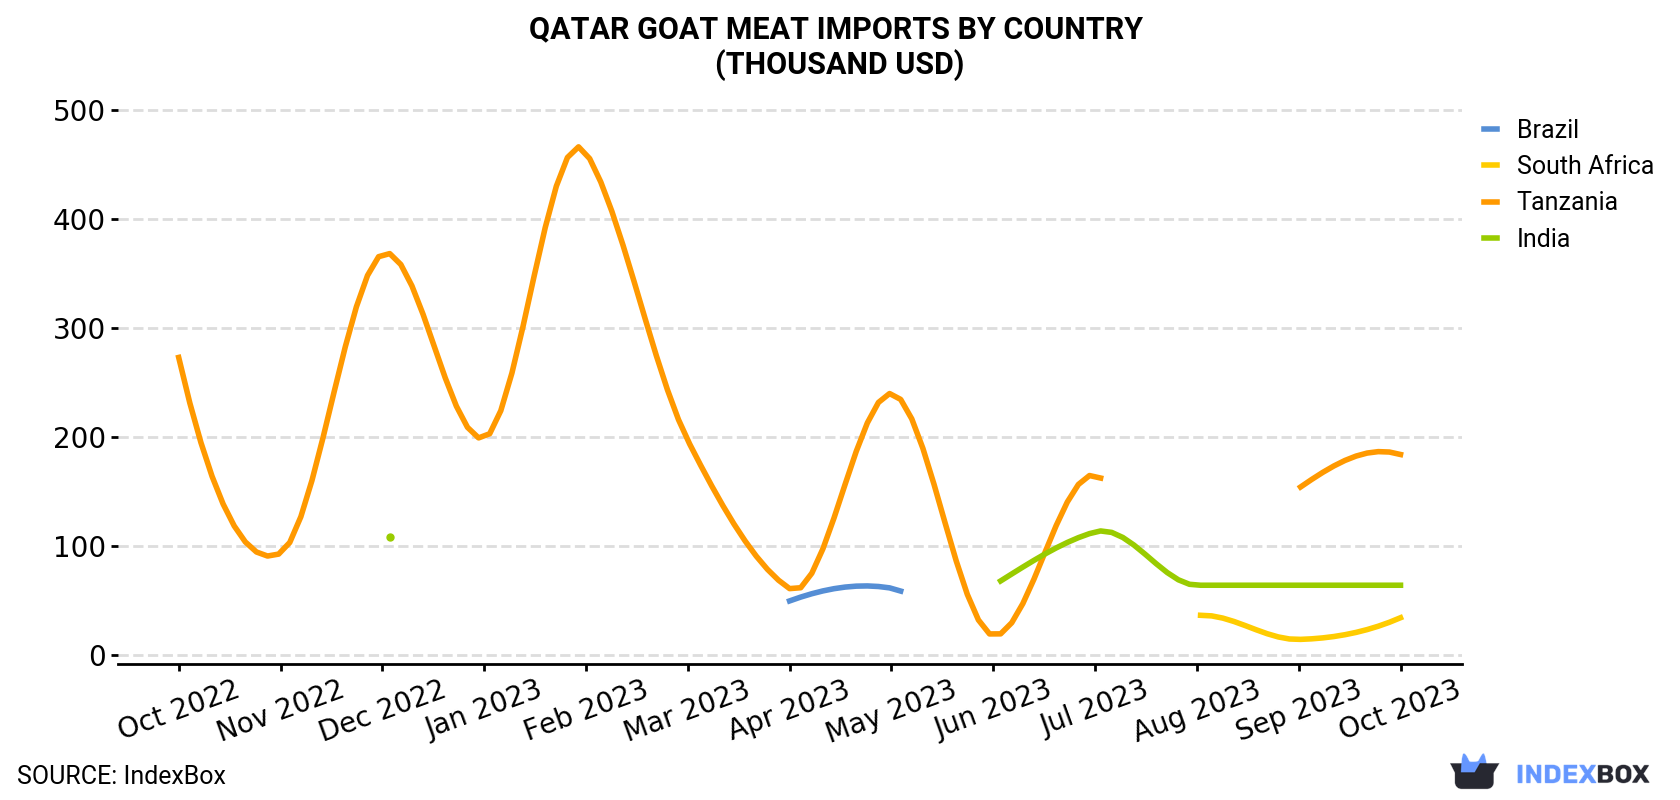 Qatar Goat Meat Imports By Country (Thousand USD)